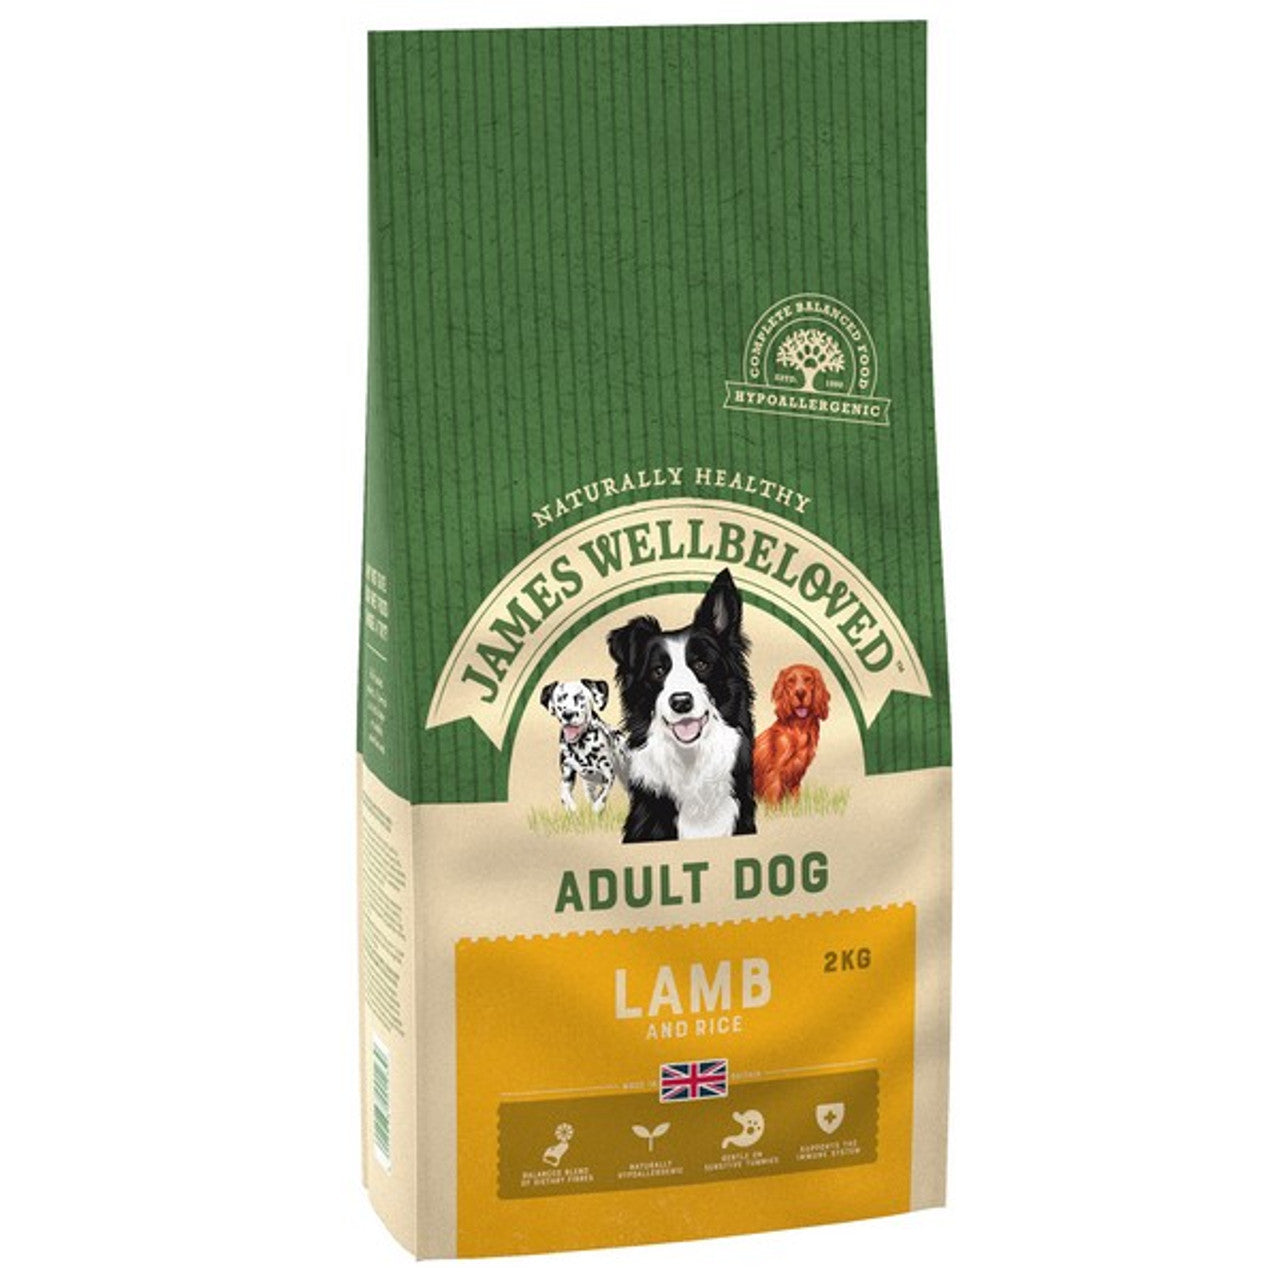 Wellbeloved Lamb and Rice Adult 2kg